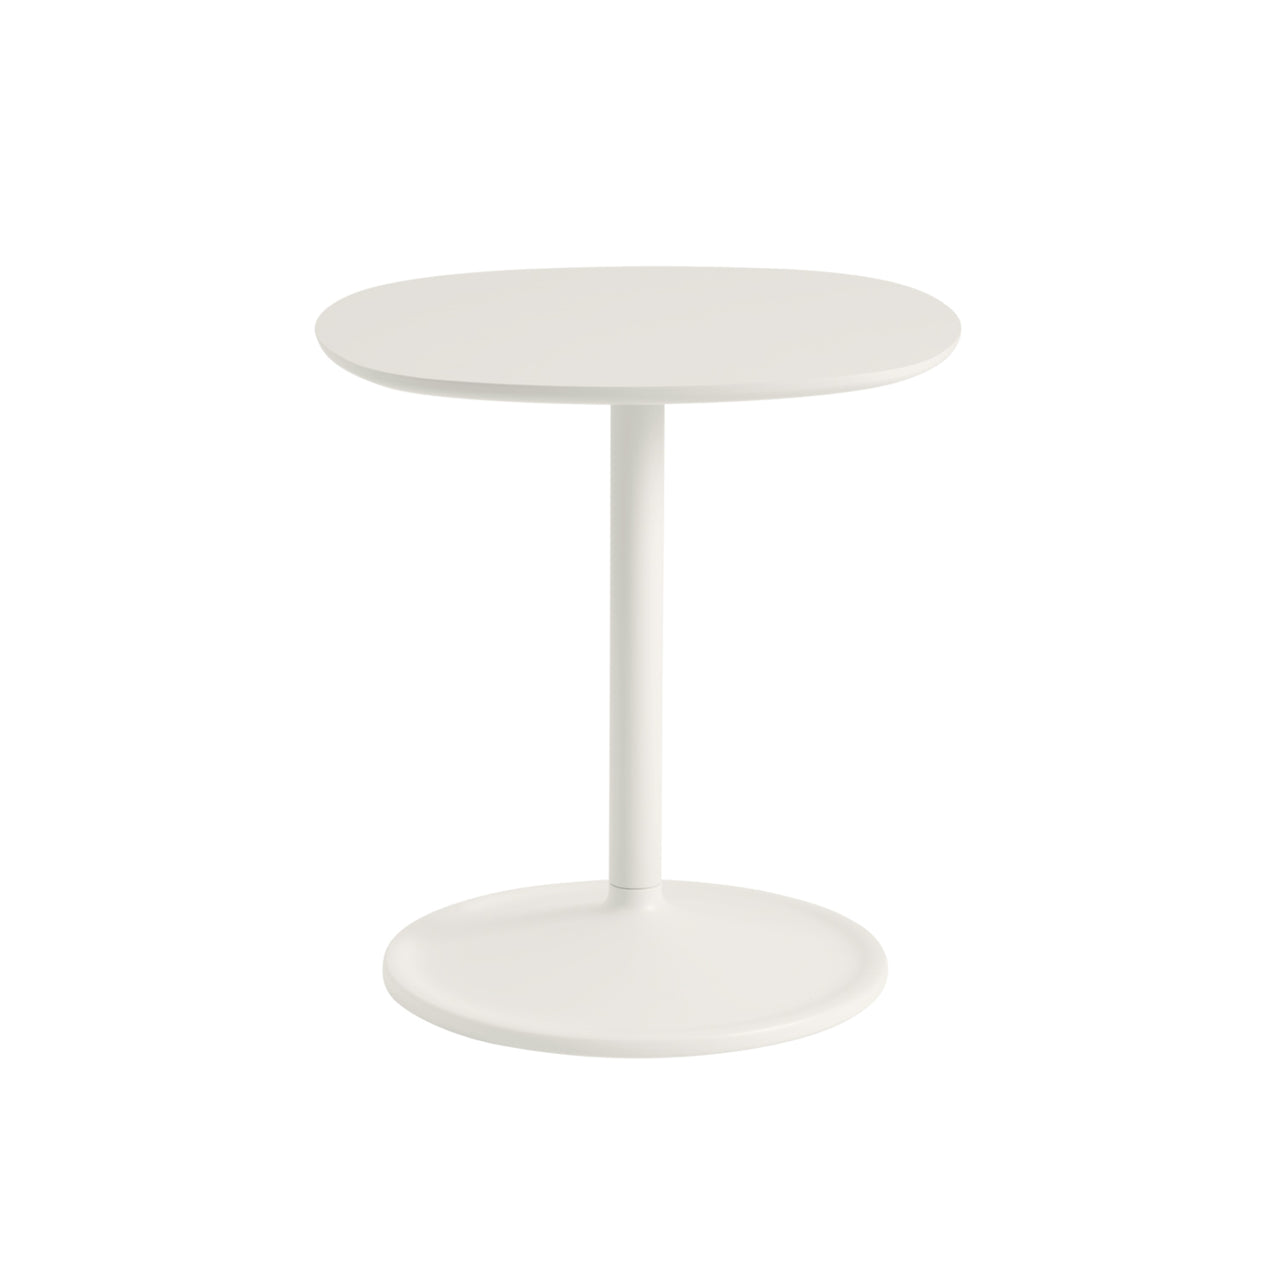 Soft Side Table Square: Large - 18.9